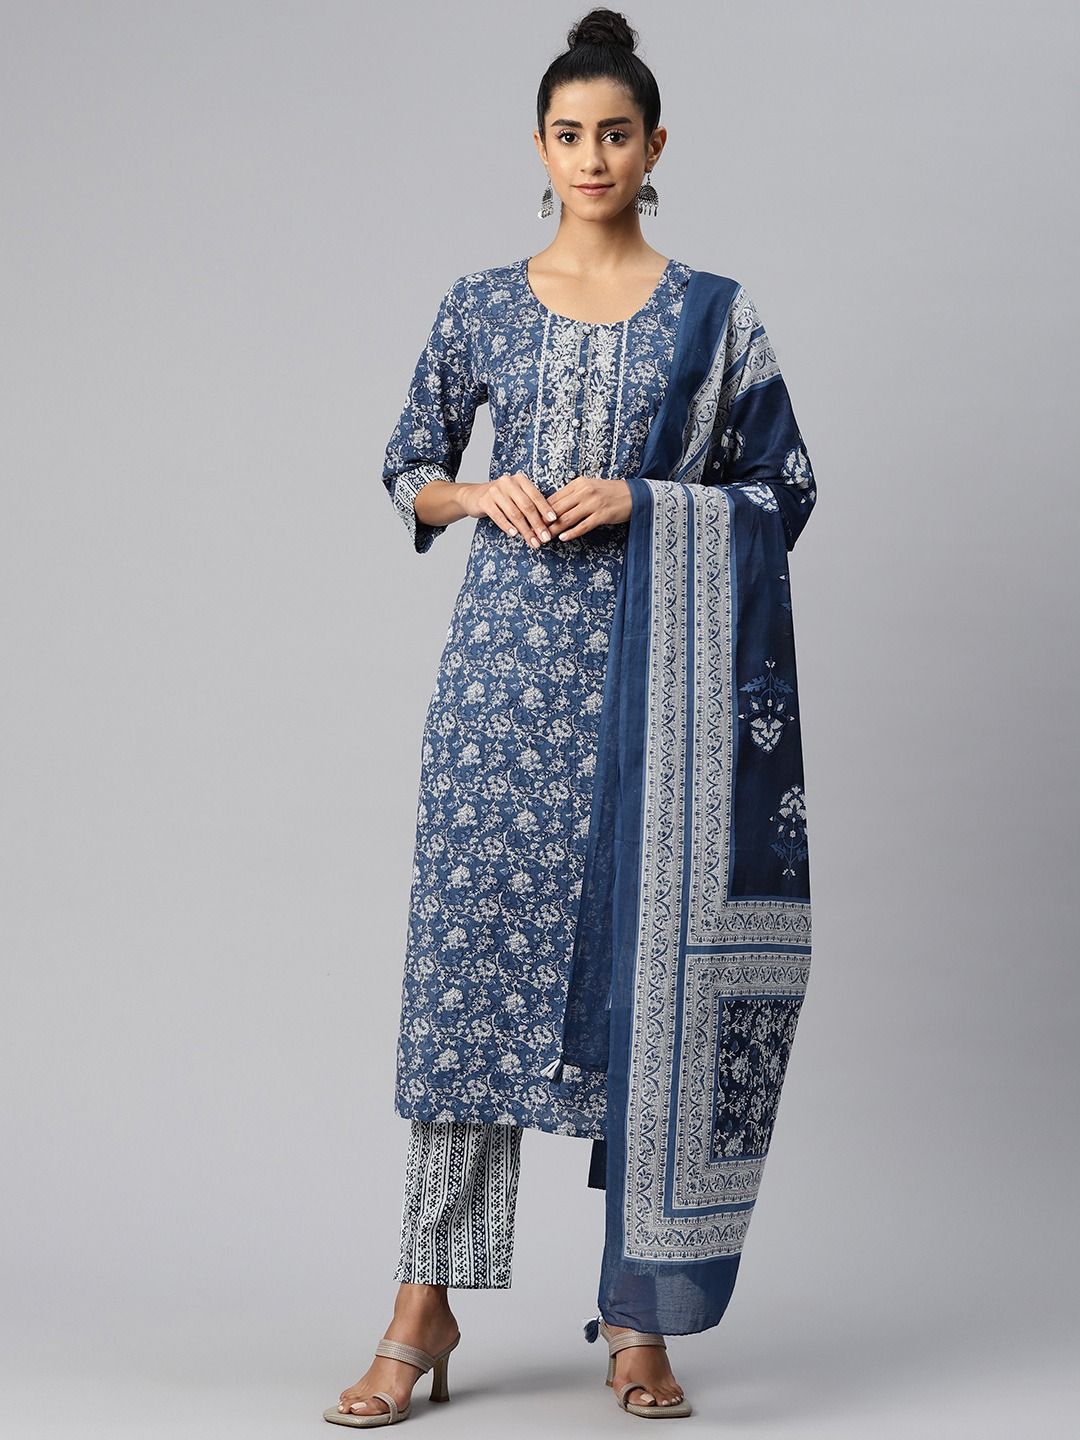 Straight Style Cotton Fabric Blue Color Kurti And Bottom With Dupatta